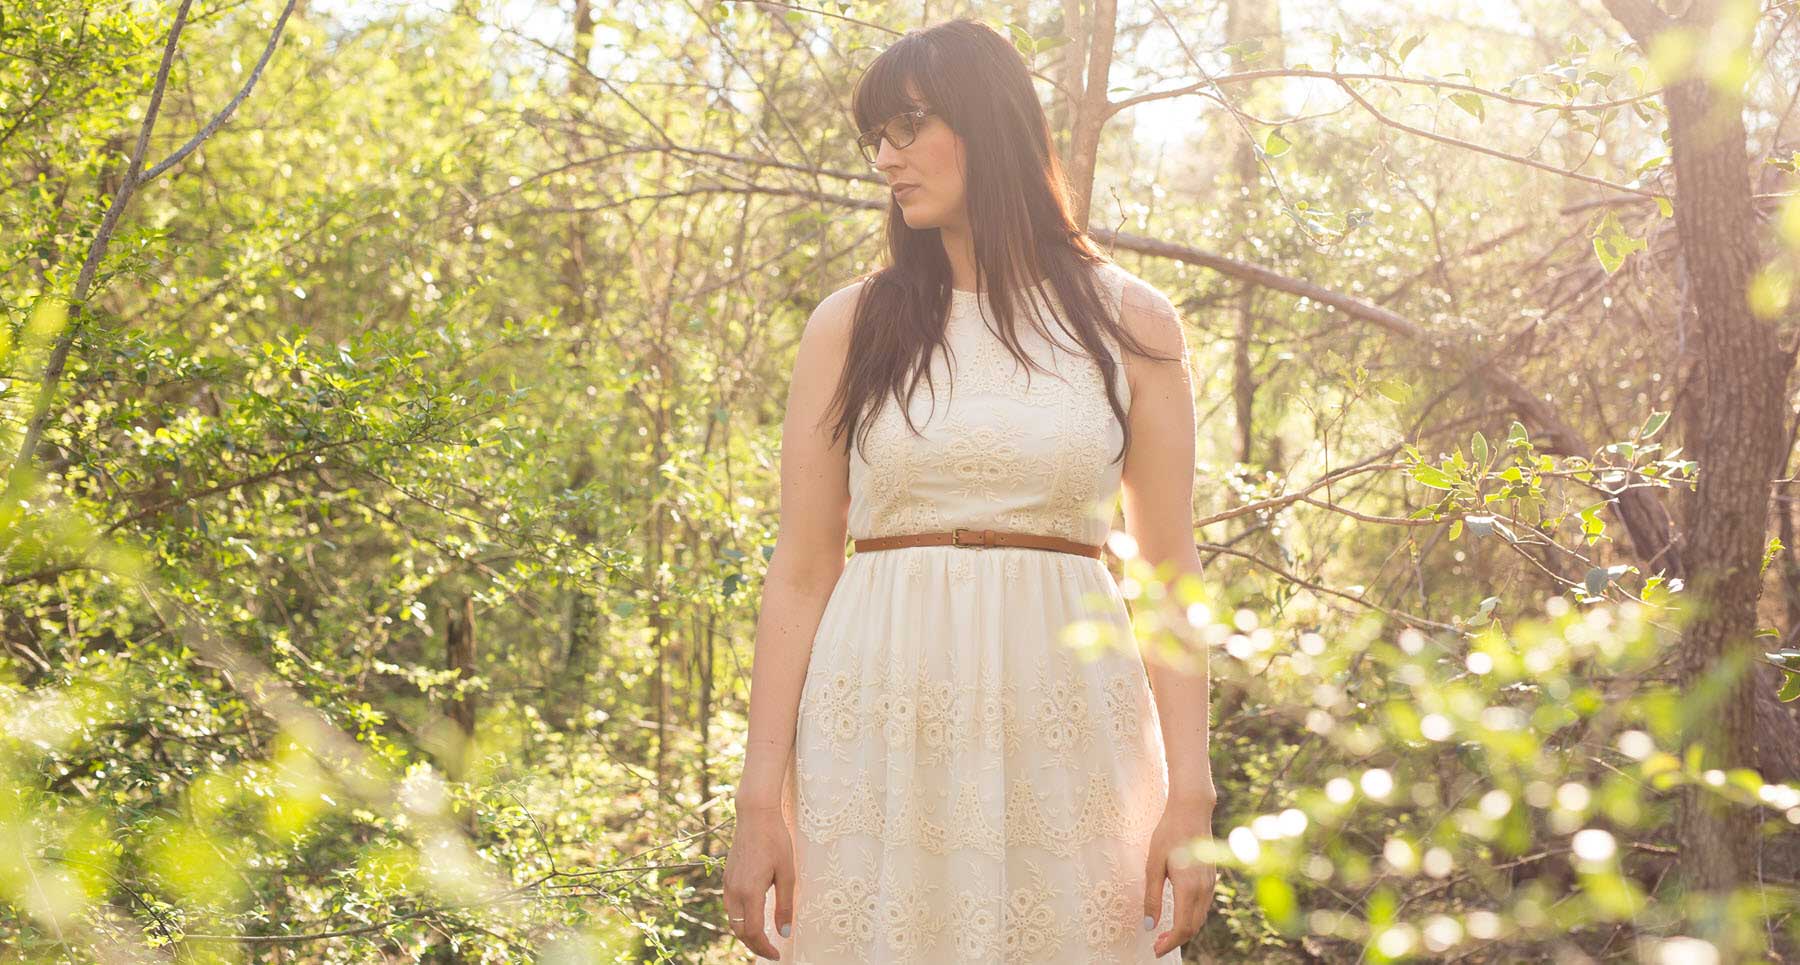 woman standing outside in a white dress struggling with fears and anxiety